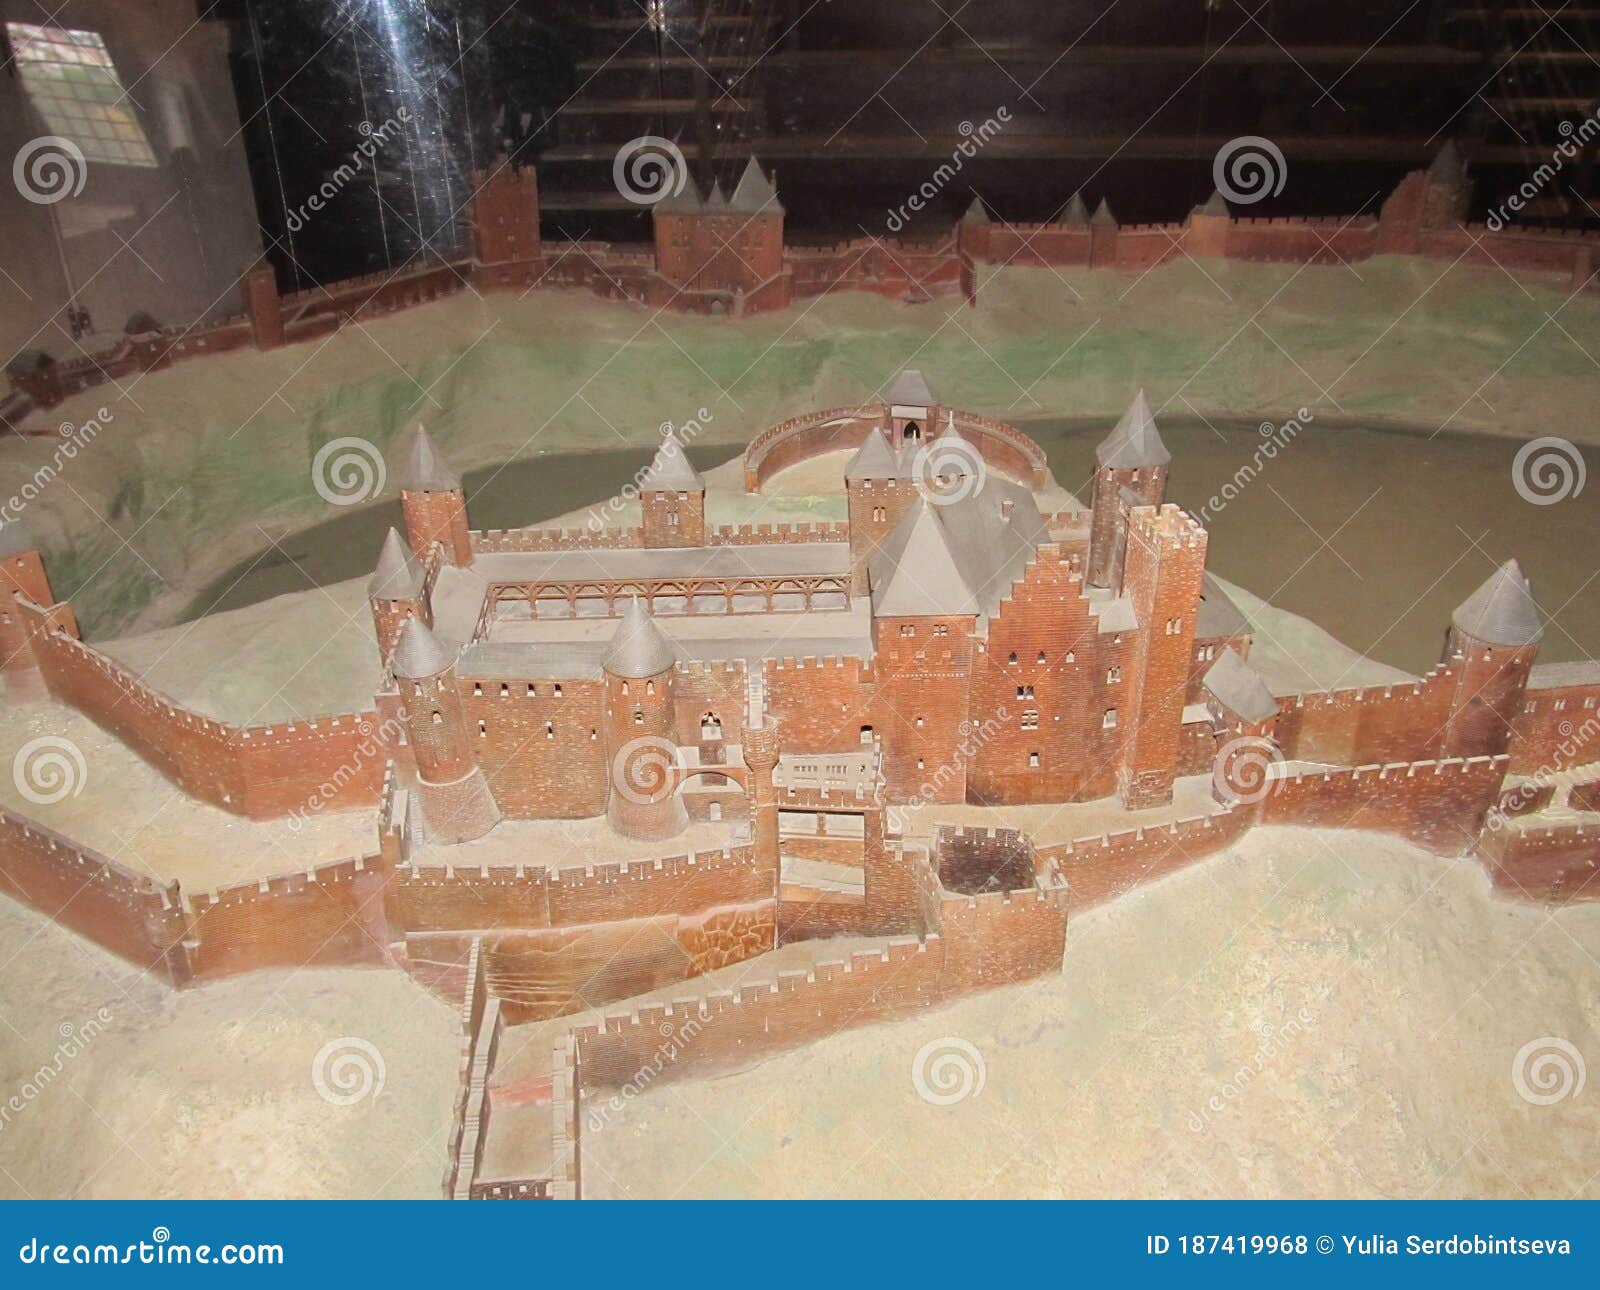 : scale model of the cite de carcassonne. the model shows the complete medieval fortification with inner and outer walls